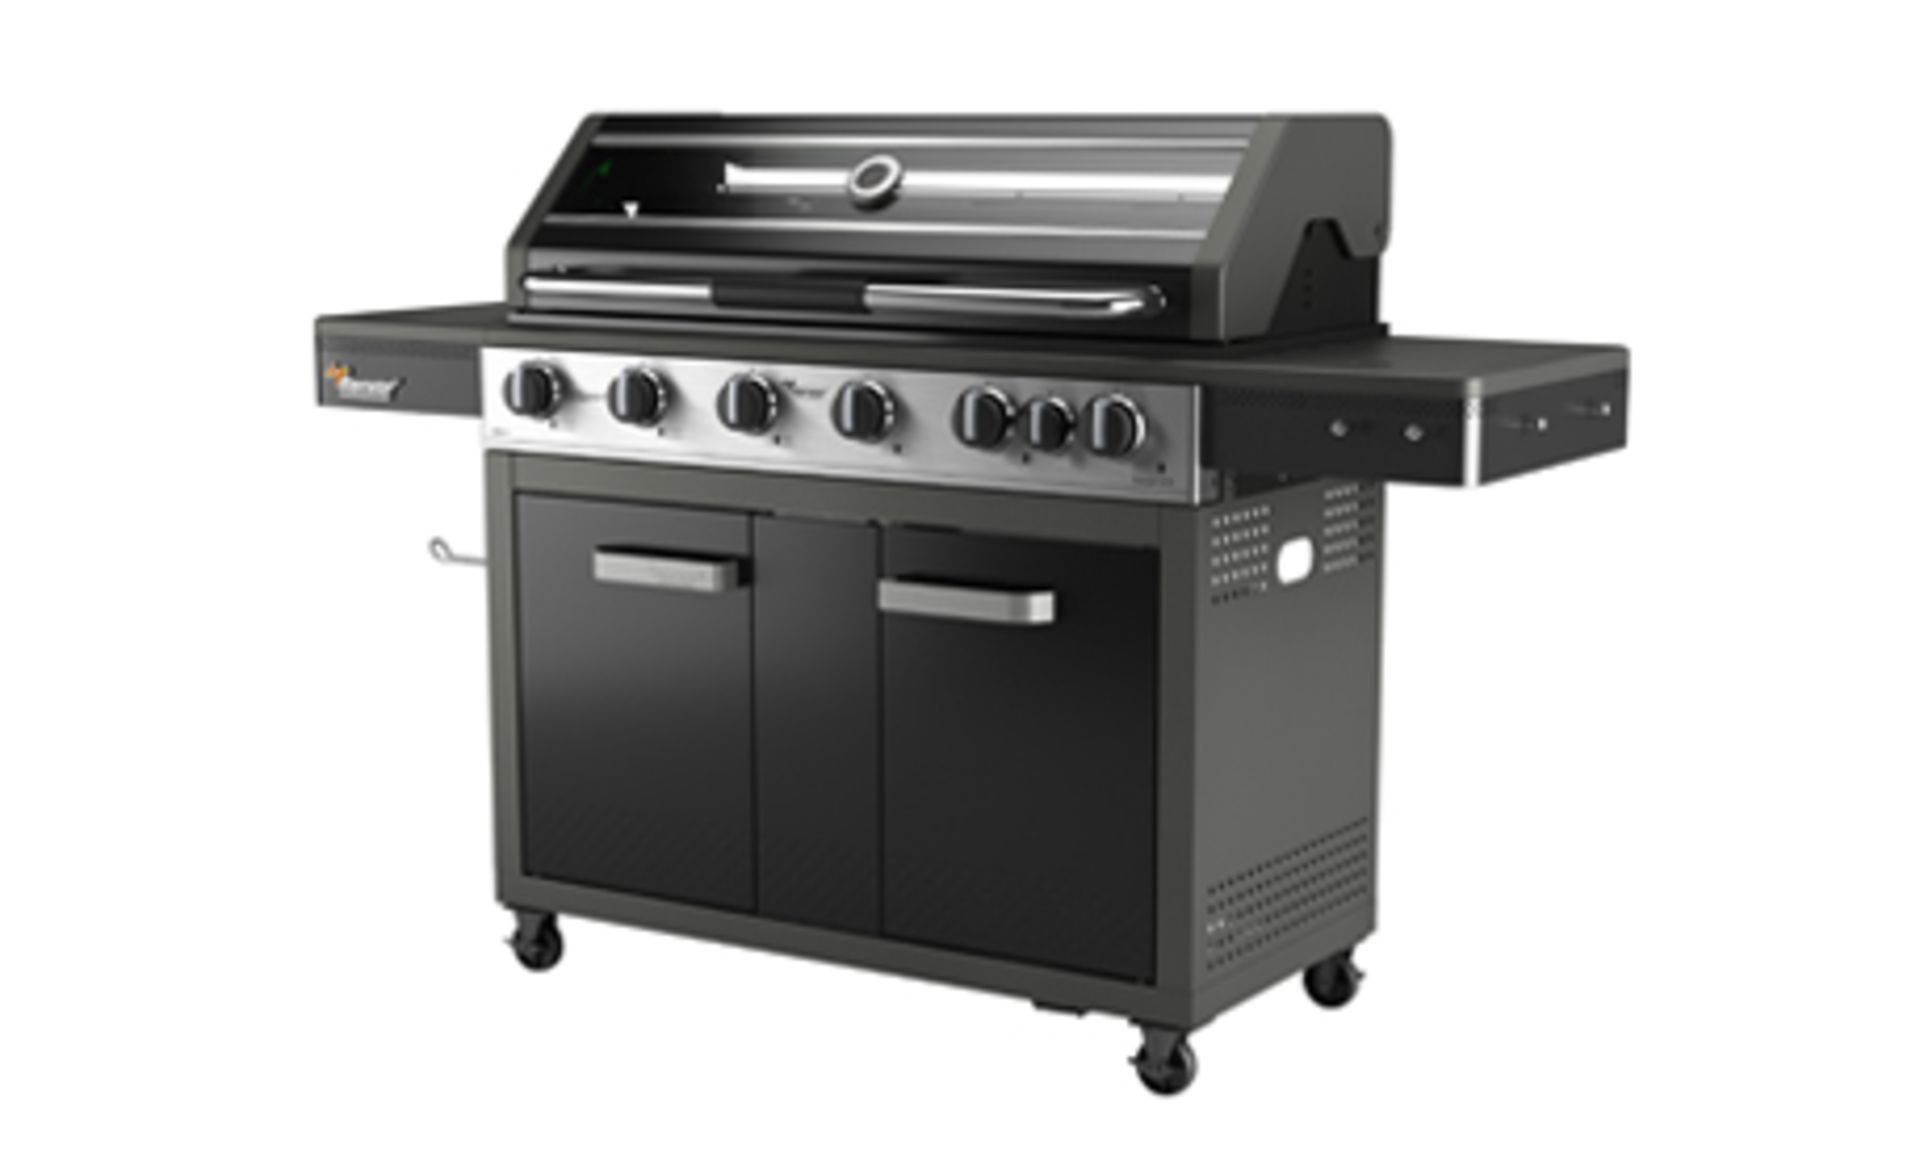 (P) Fervor Ranger 610 6 Burner Gas BBQ RRP £330. New, Banded Item With Box Damage. (Contents Not Ch - Image 2 of 5